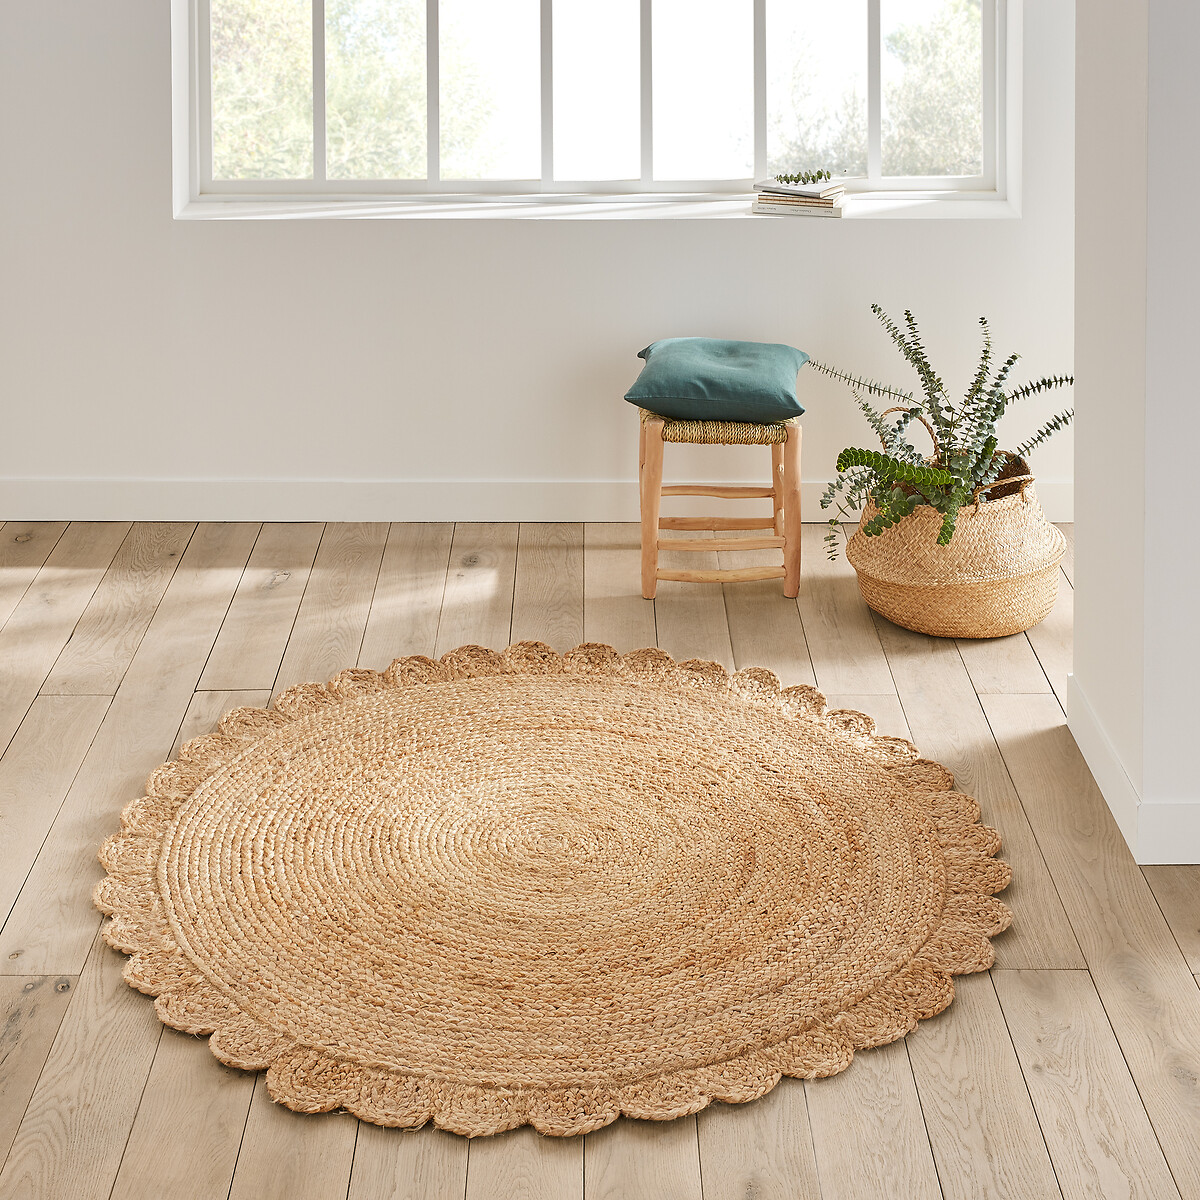 Aftas Flower Style Round Jute Rug, What Is The Best Way To Clean A Jute Rug